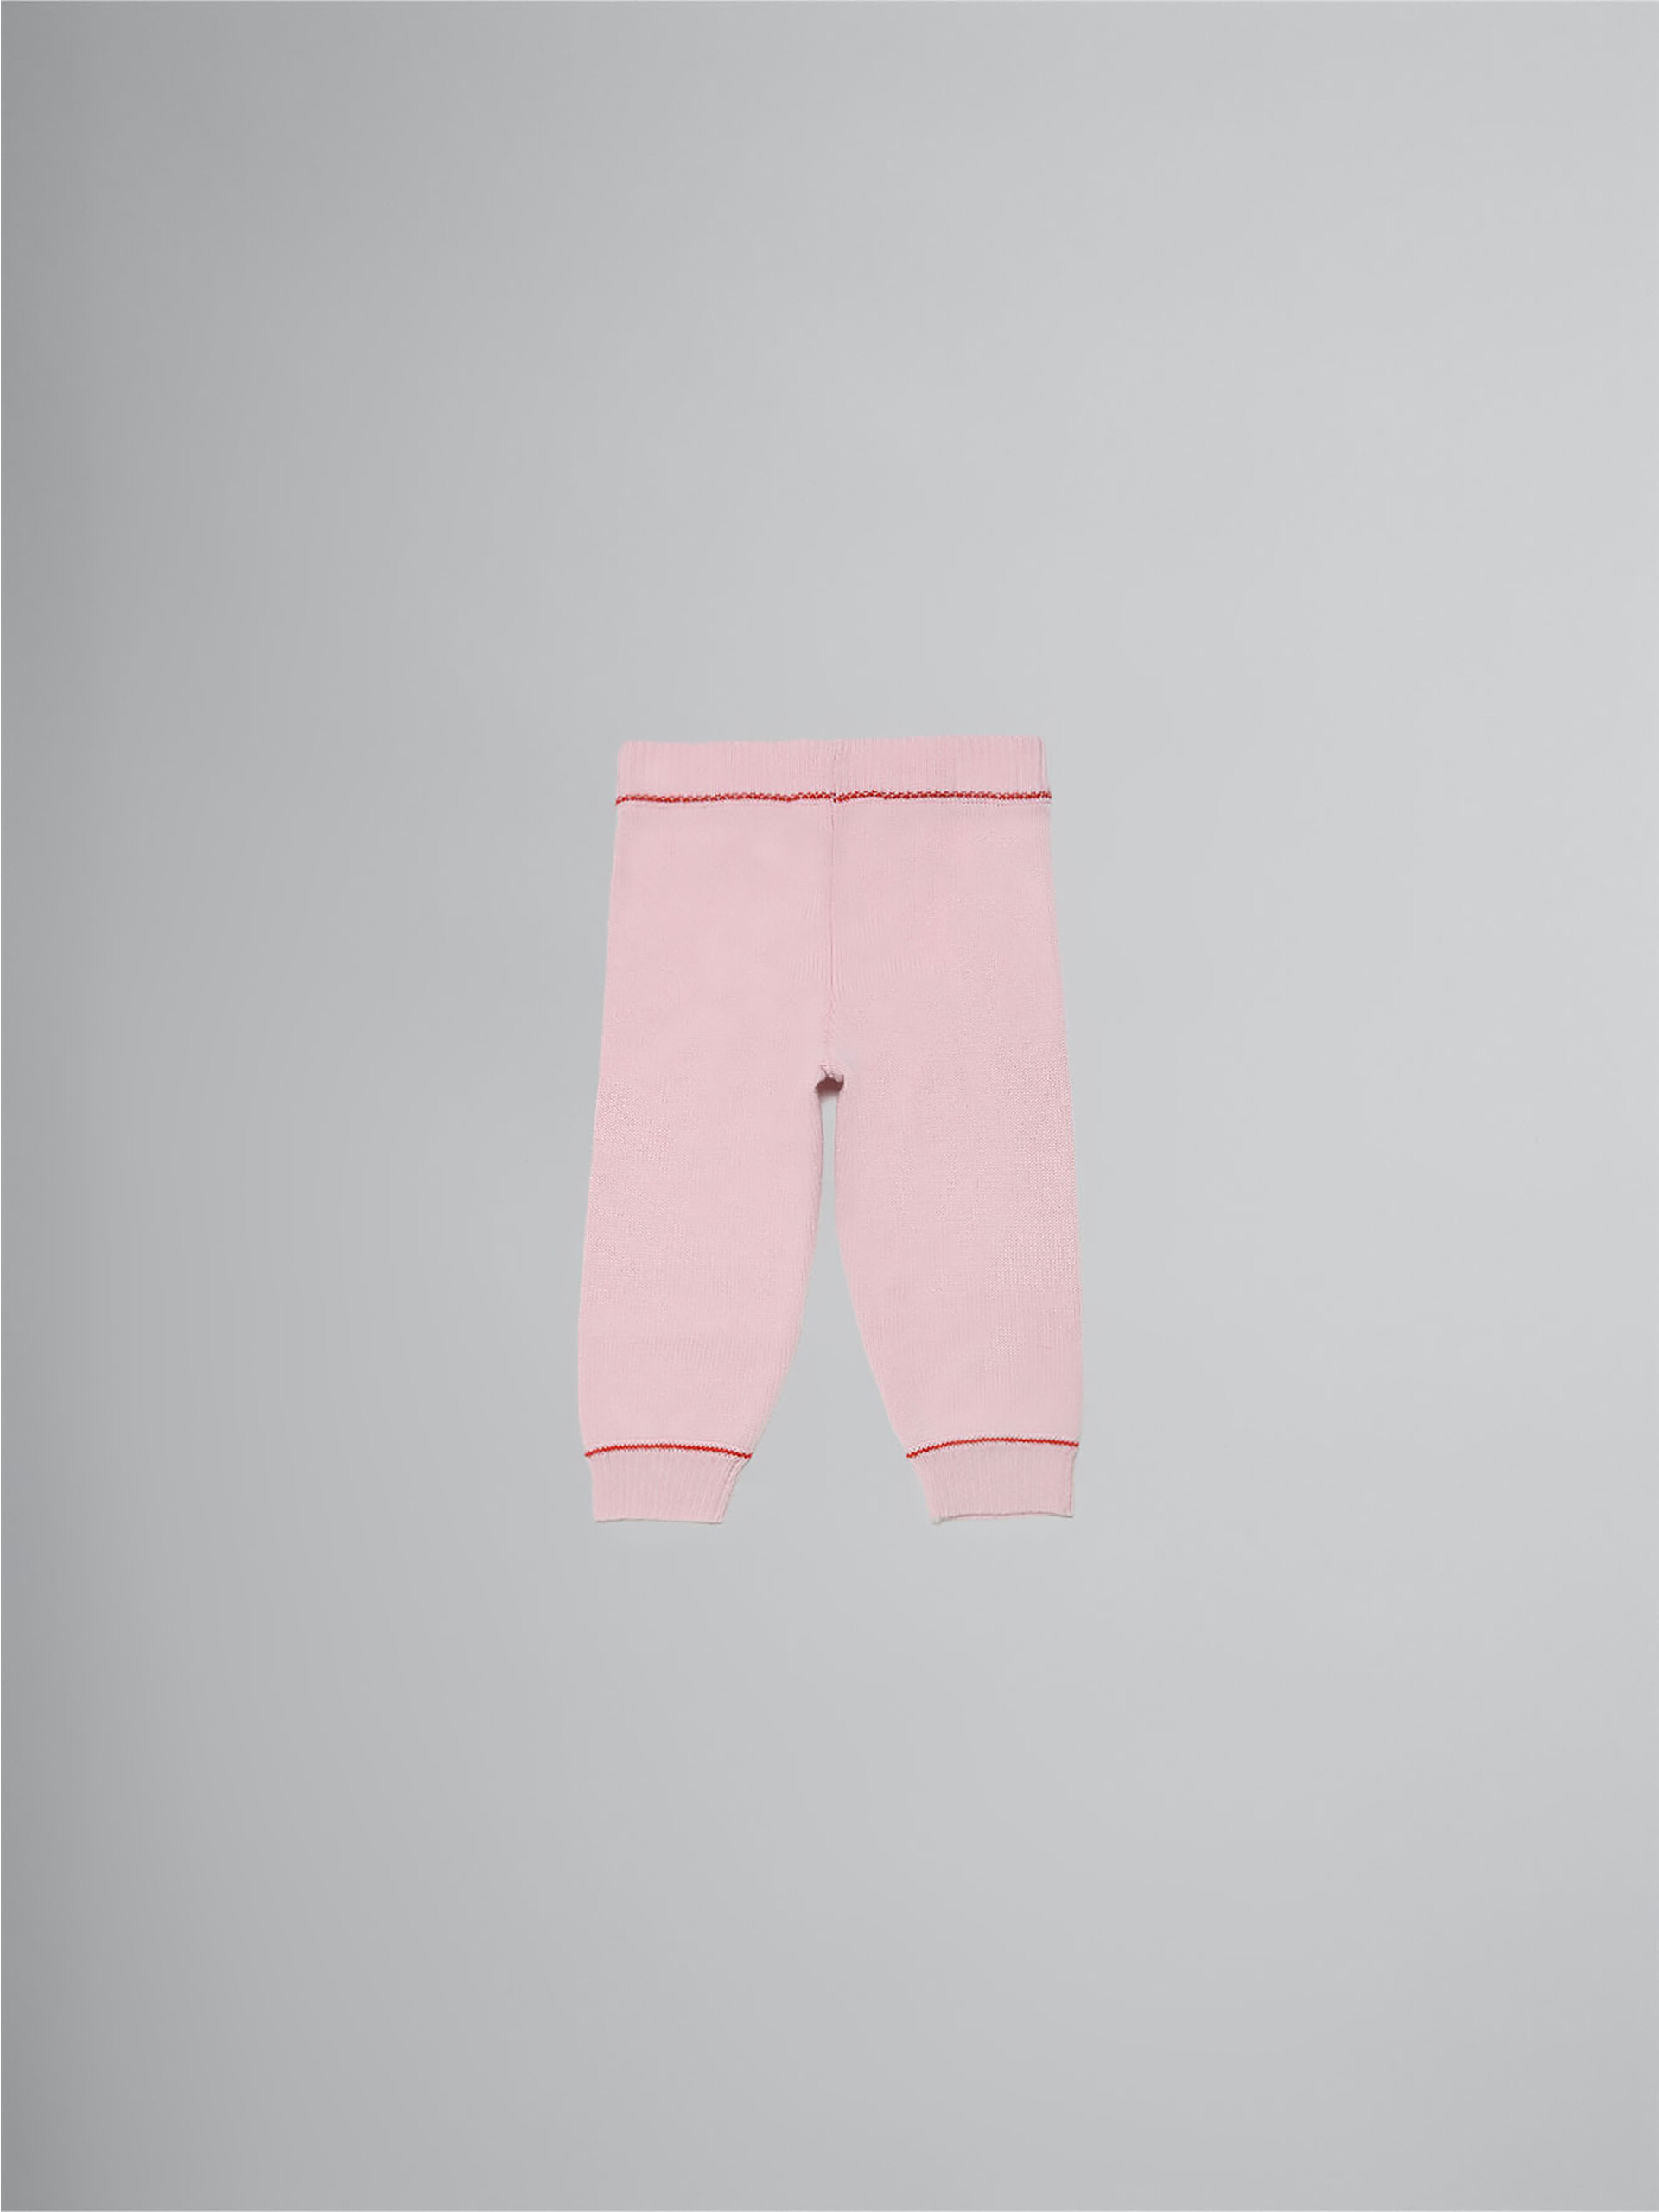 Pink wool and cashmere trousers with logo - Pants - Image 2